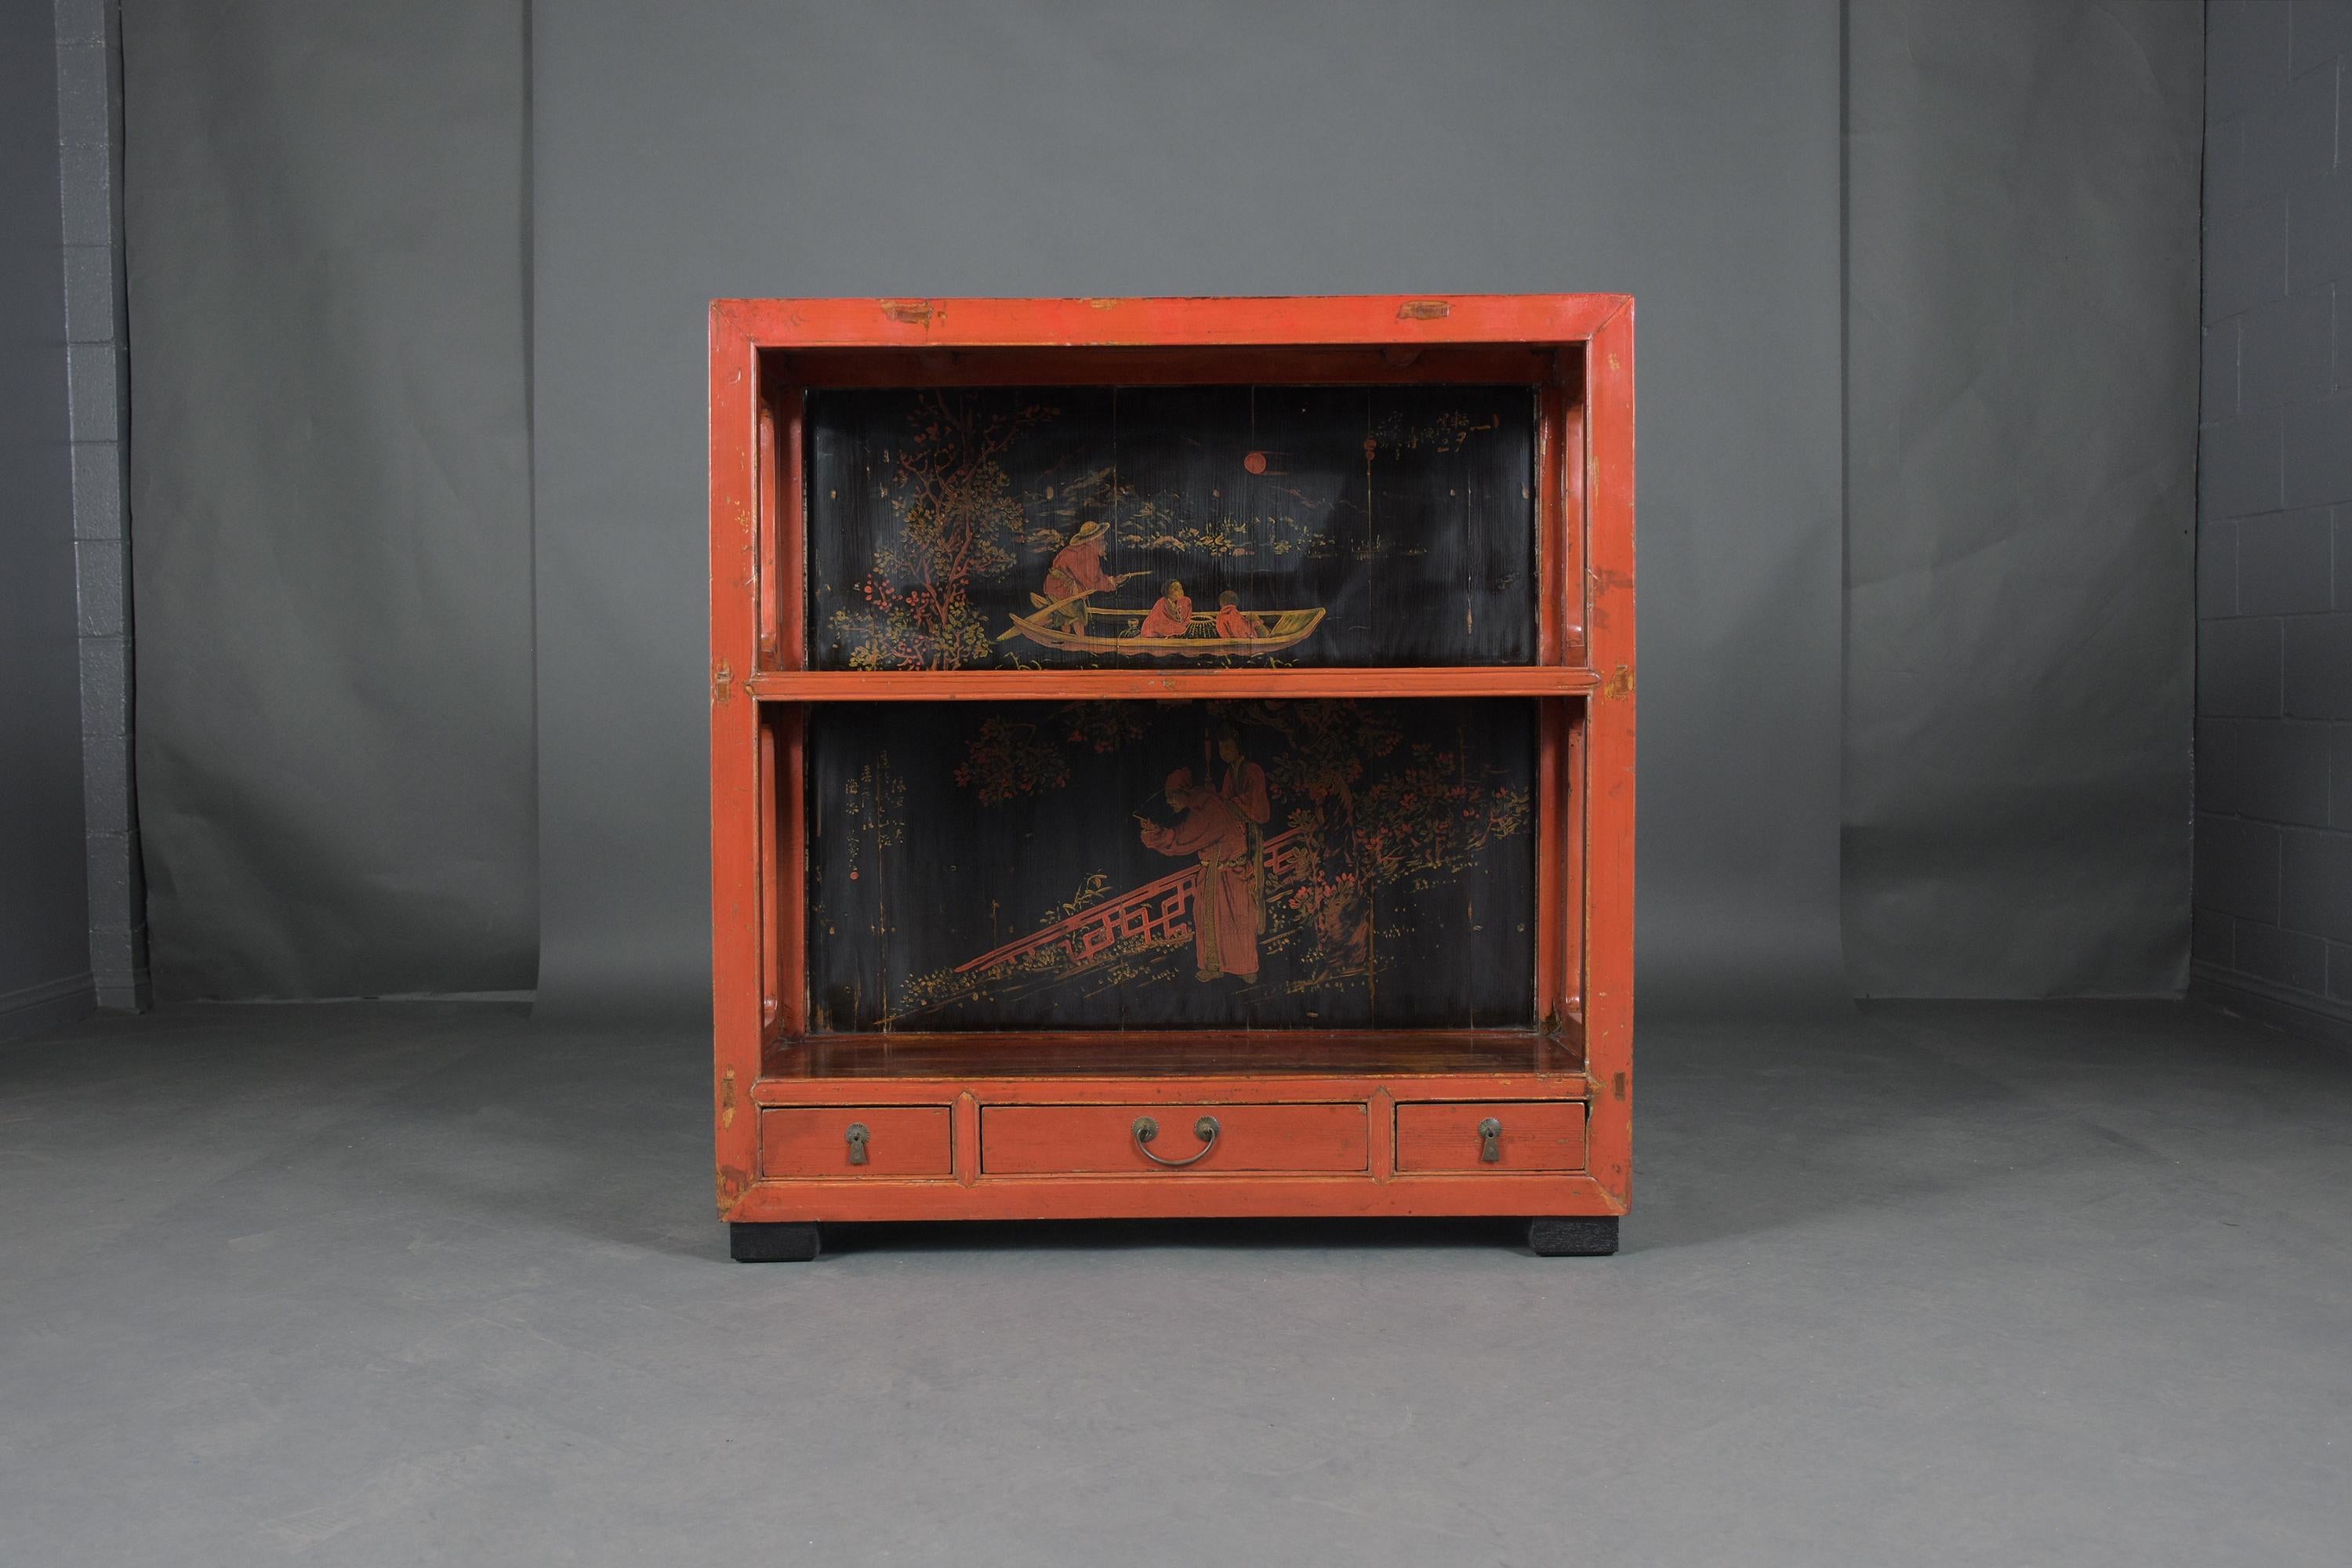 An extraordinary Chinese open cabinet crafted out of teak wood in a good condition. This vintage sideboard features hand-painted details an original red paint color with a unique distressed finish, open shelves, and three bottom drawers. This small